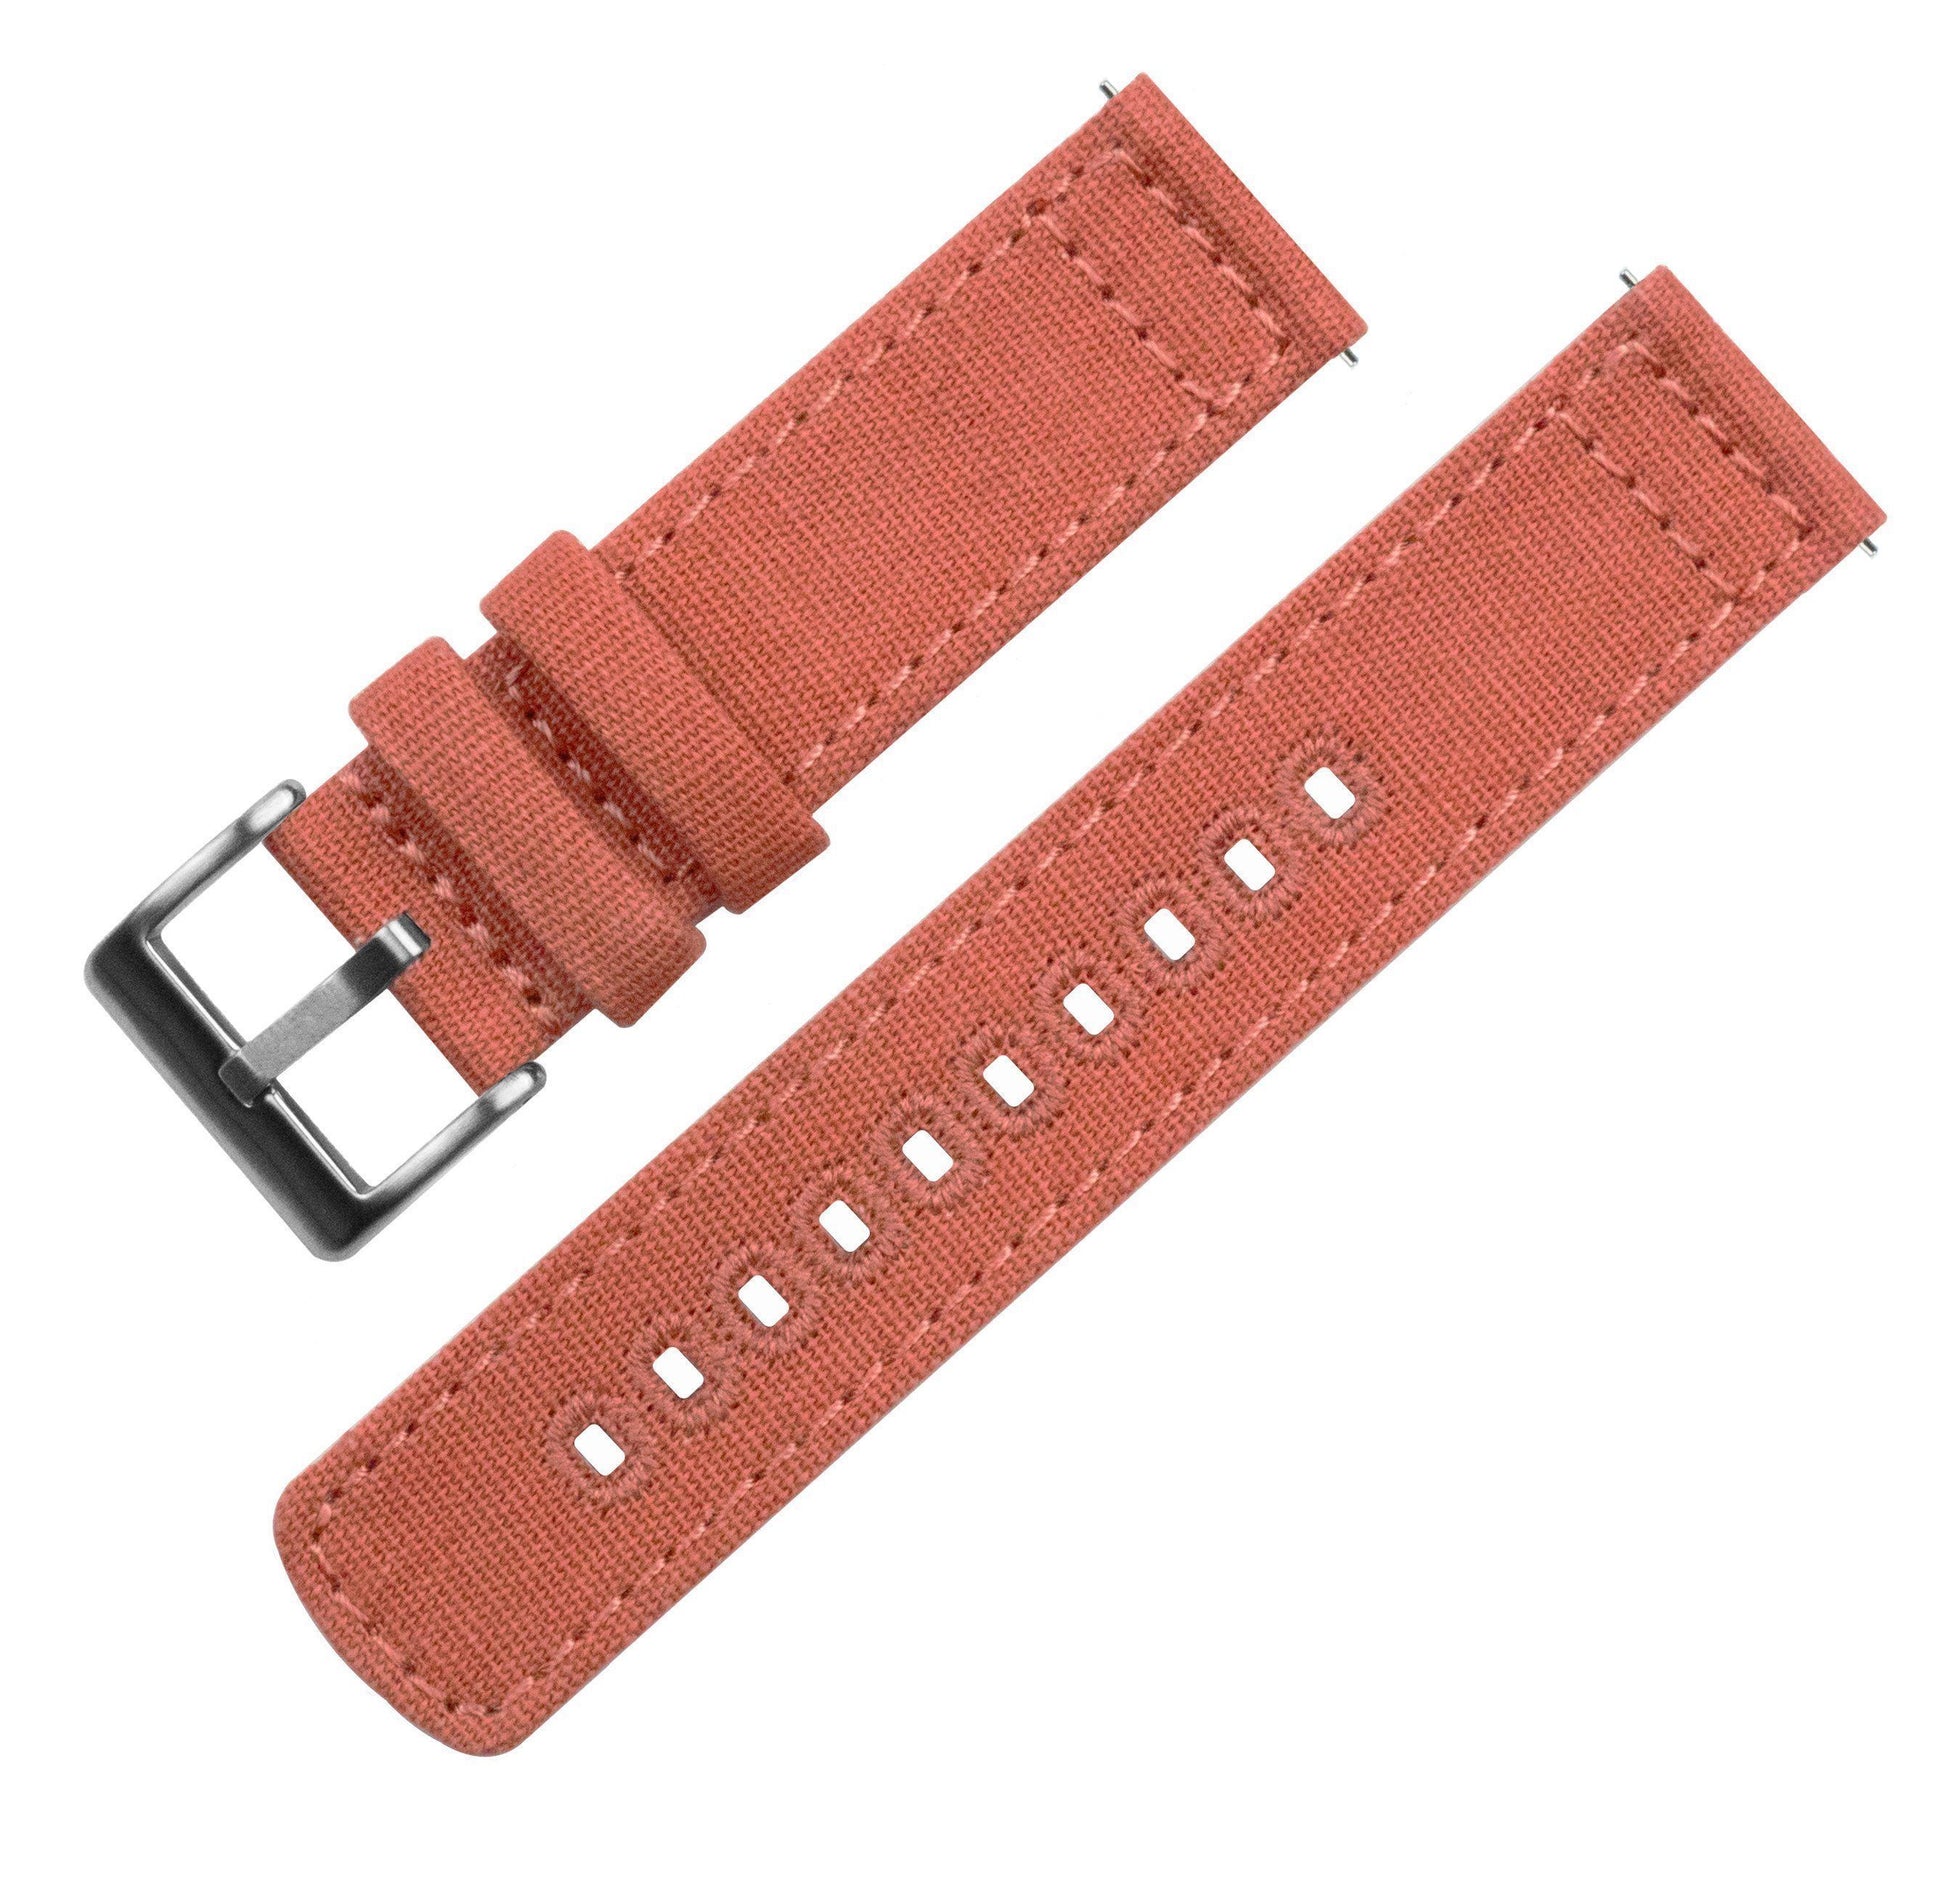 Withings Nokia Activité and Steel HR  | Autumn Canvas - Barton Watch Bands